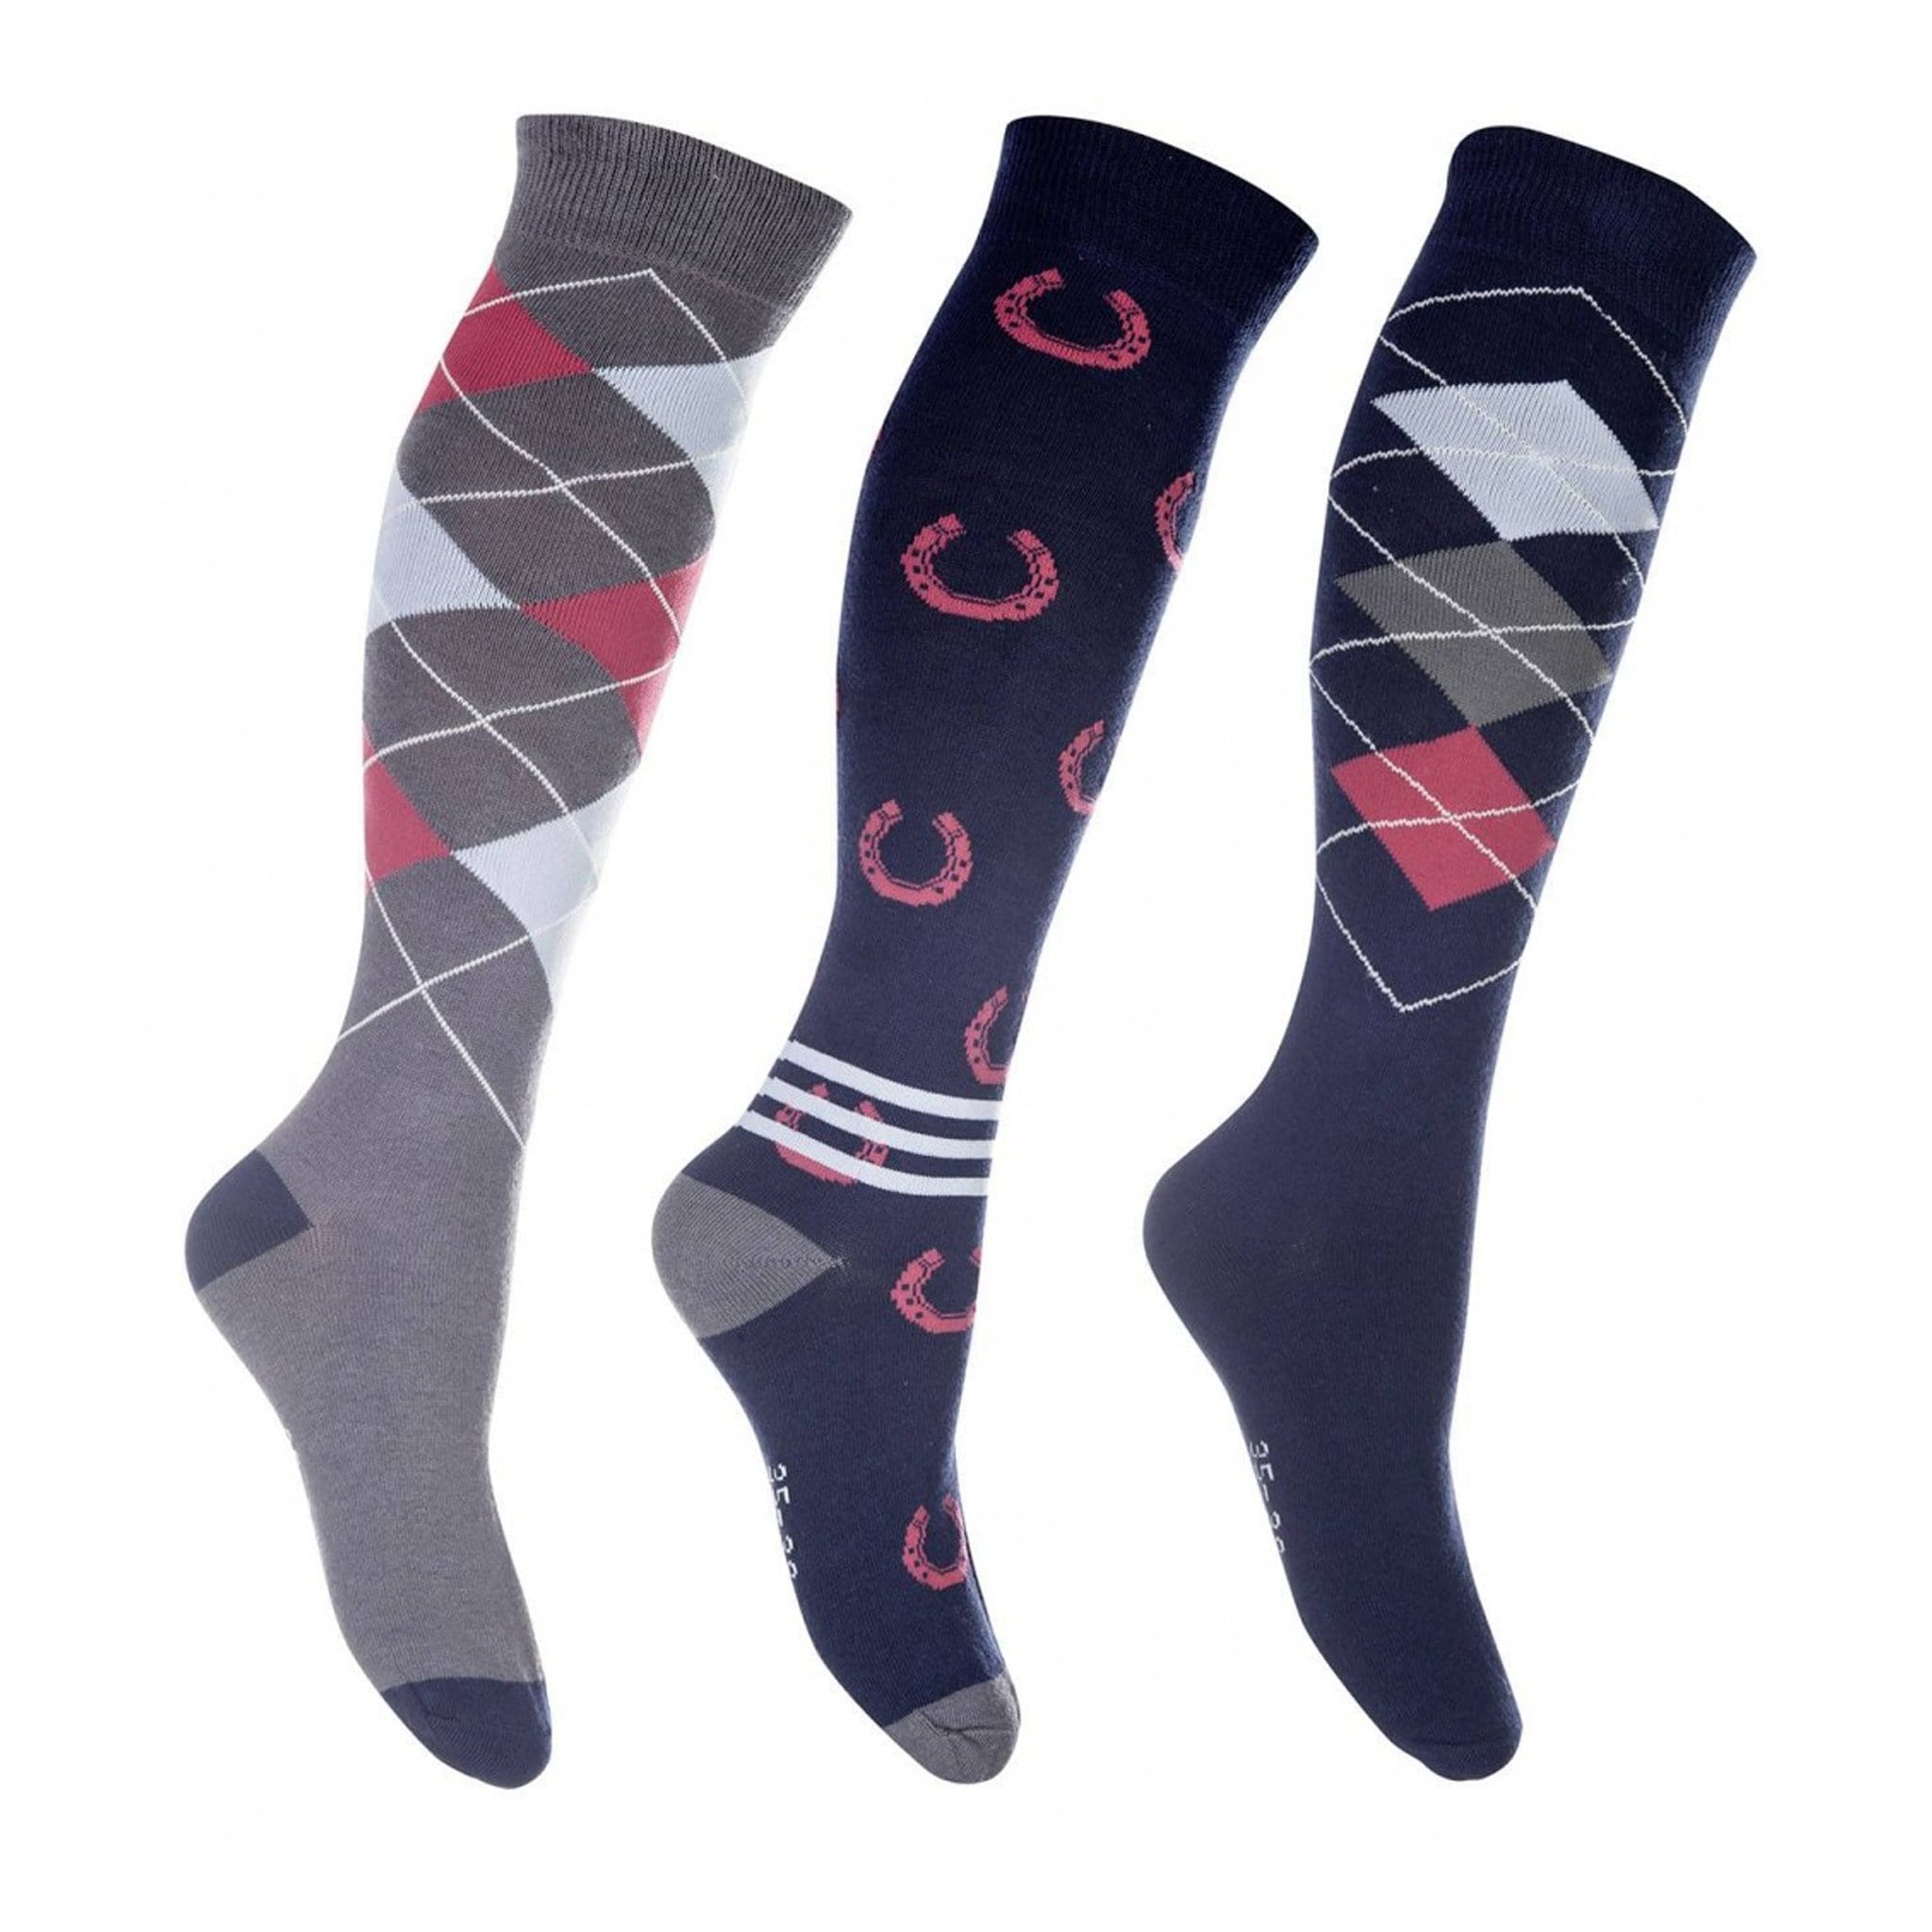 HKM Cardiff Riding Socks 3 Pack | Free UK Delivery Available | EQUUS